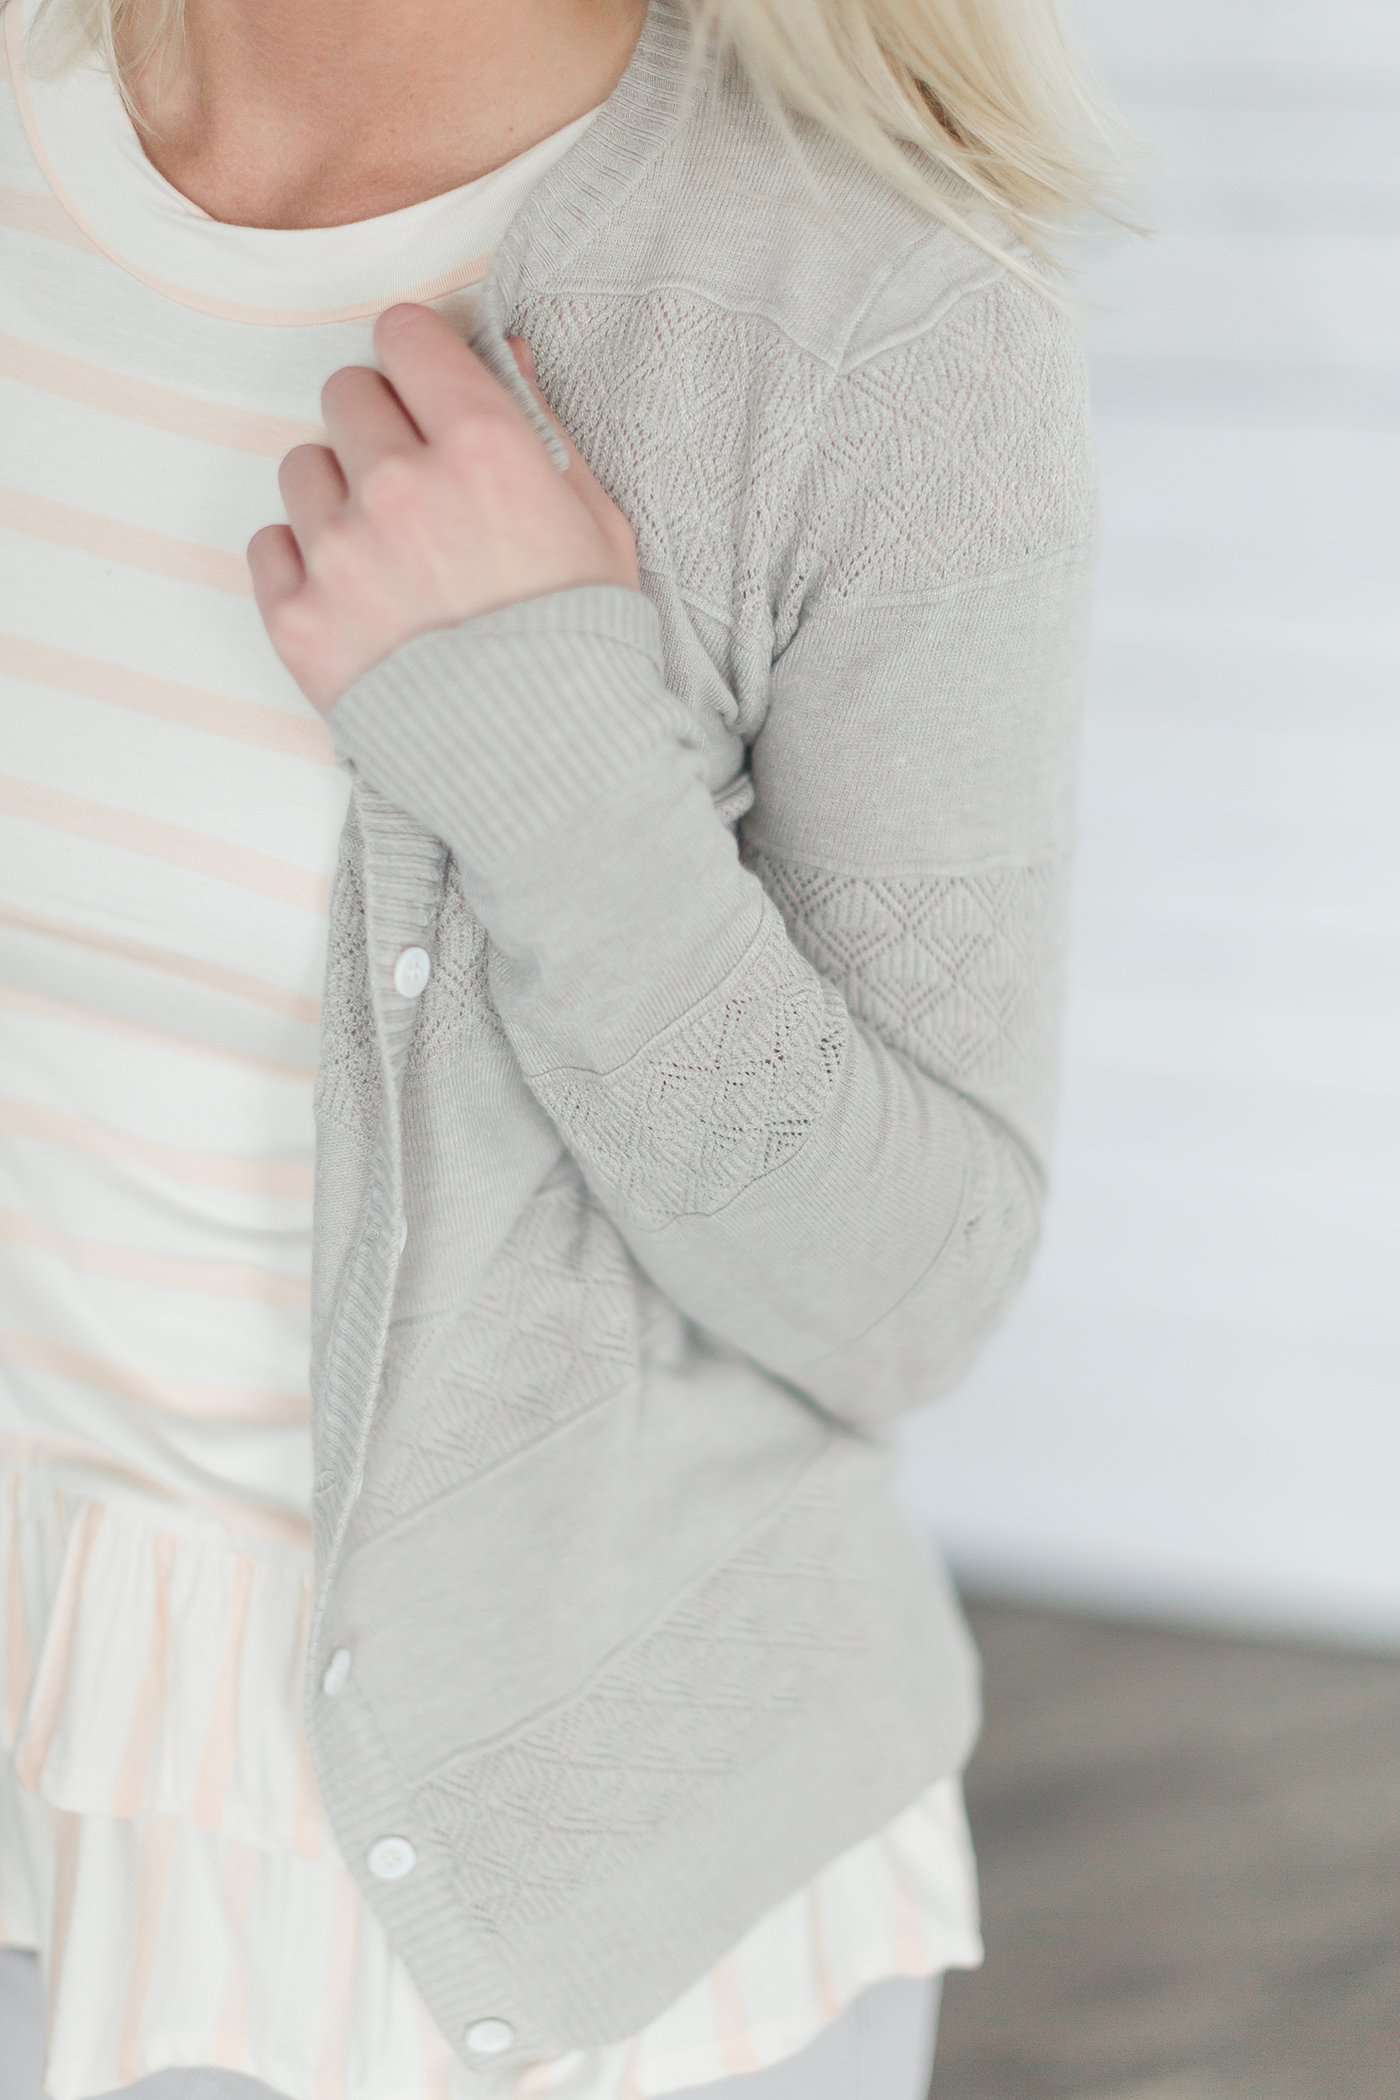 Women's button down detailed cardigan in mustard, dusty pink, ivory and gray.